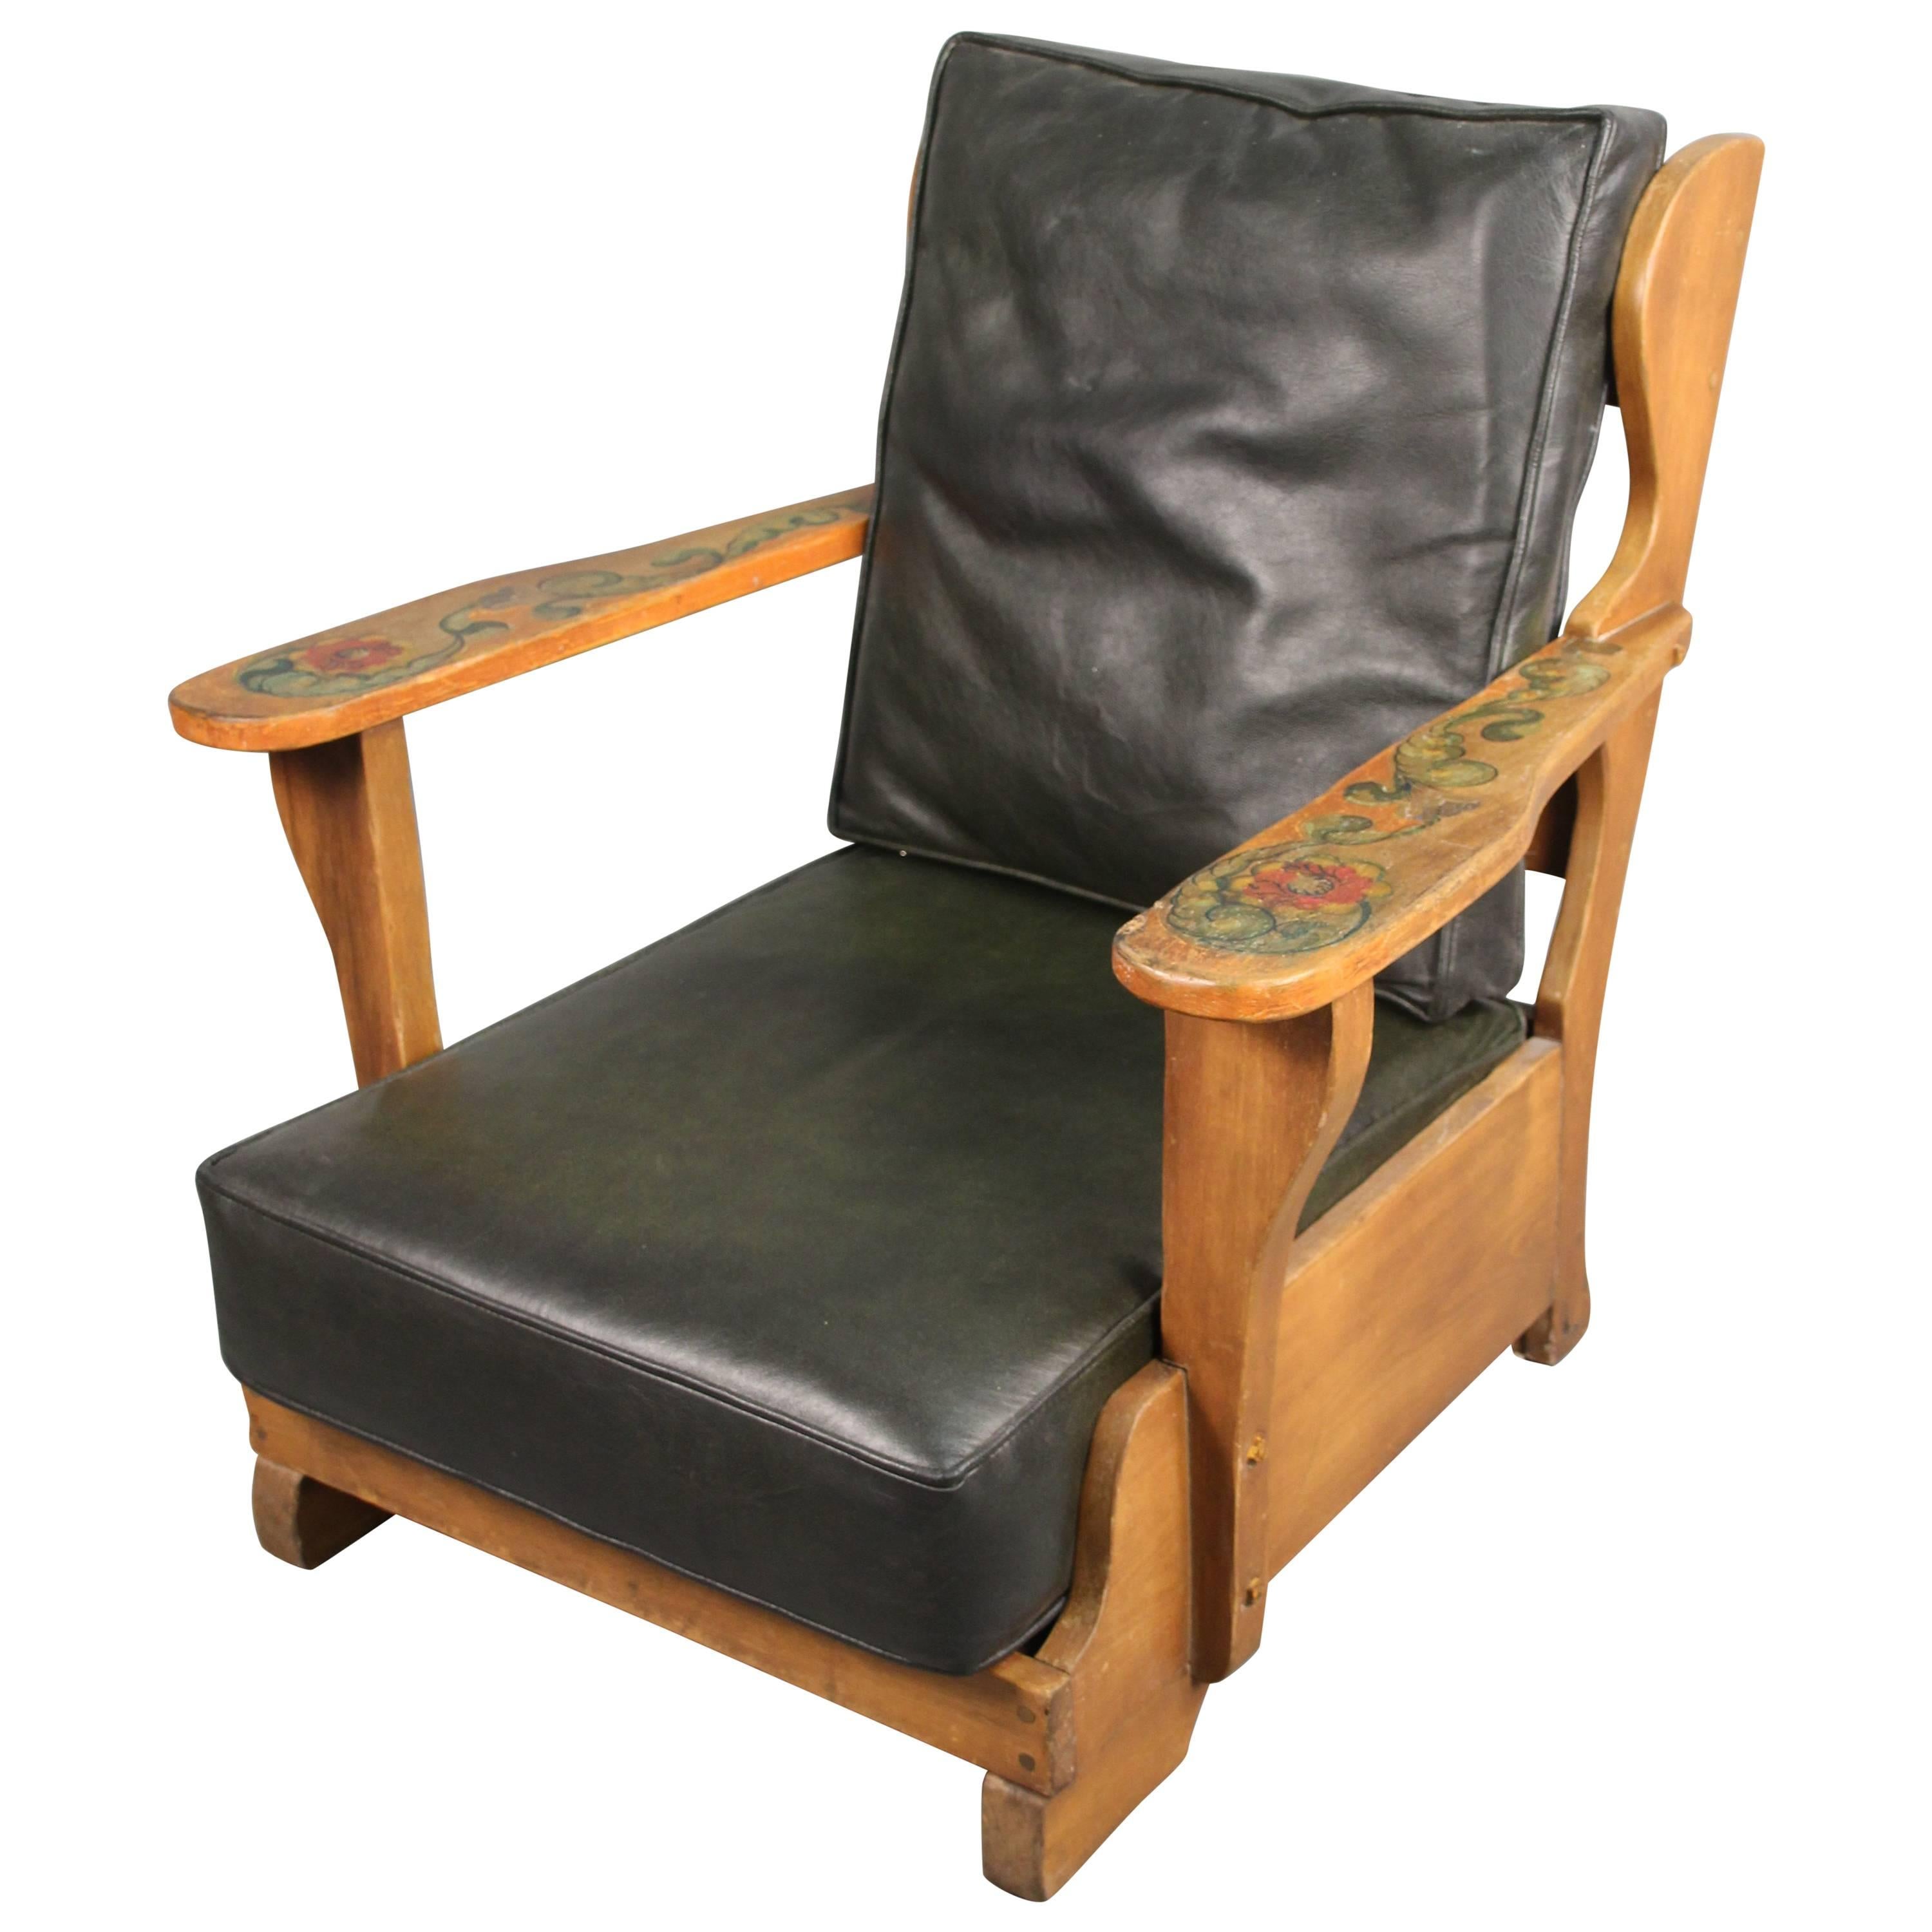 Signed Monterey Armchair with New Dark Green Leather Upholstery, circa 1930s